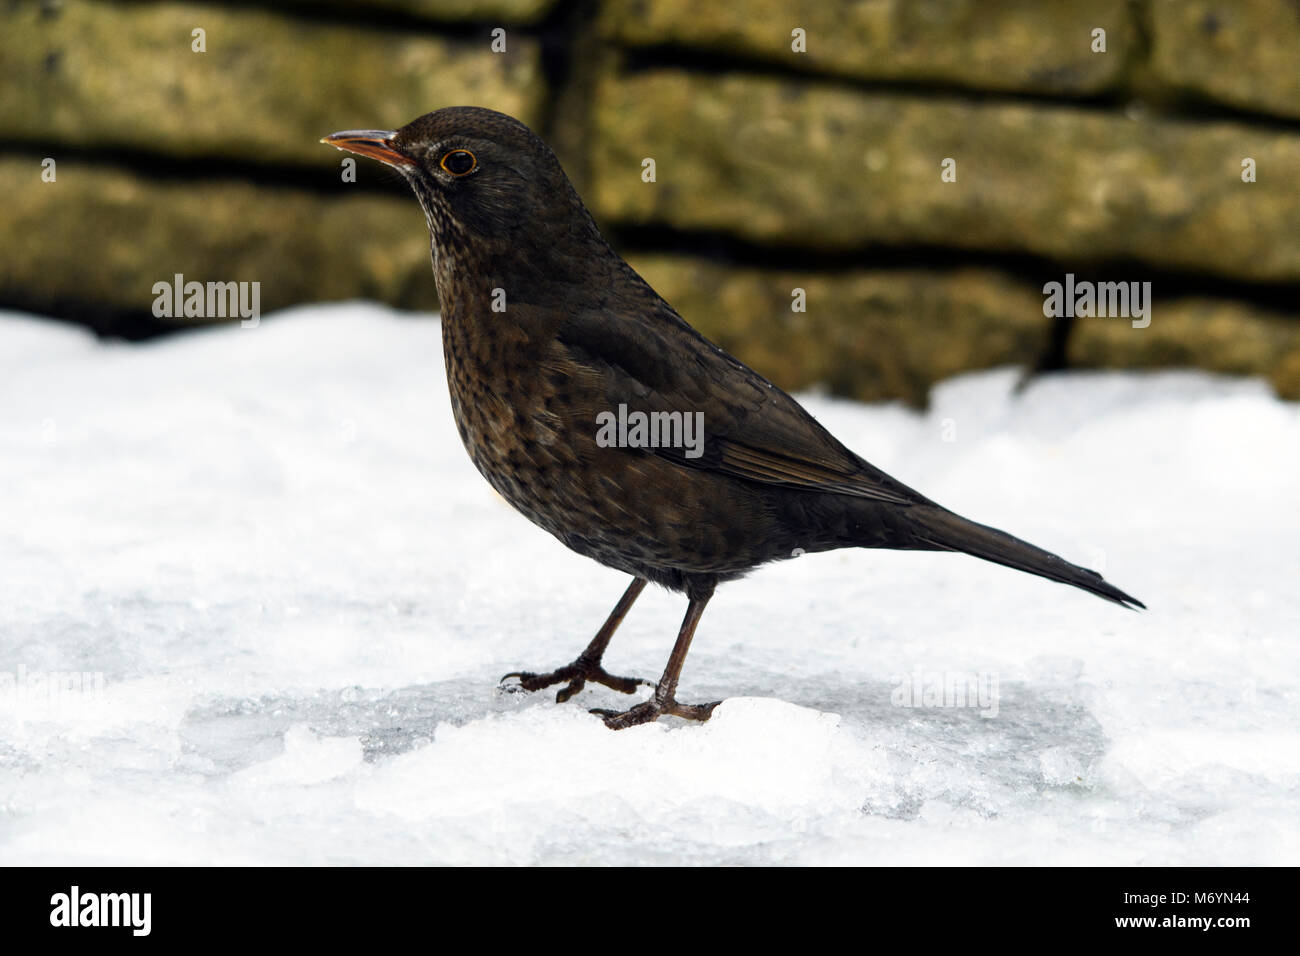 Female blackbird in the snow by the edge of a walled garden searching and foraging for food. Stock Photo